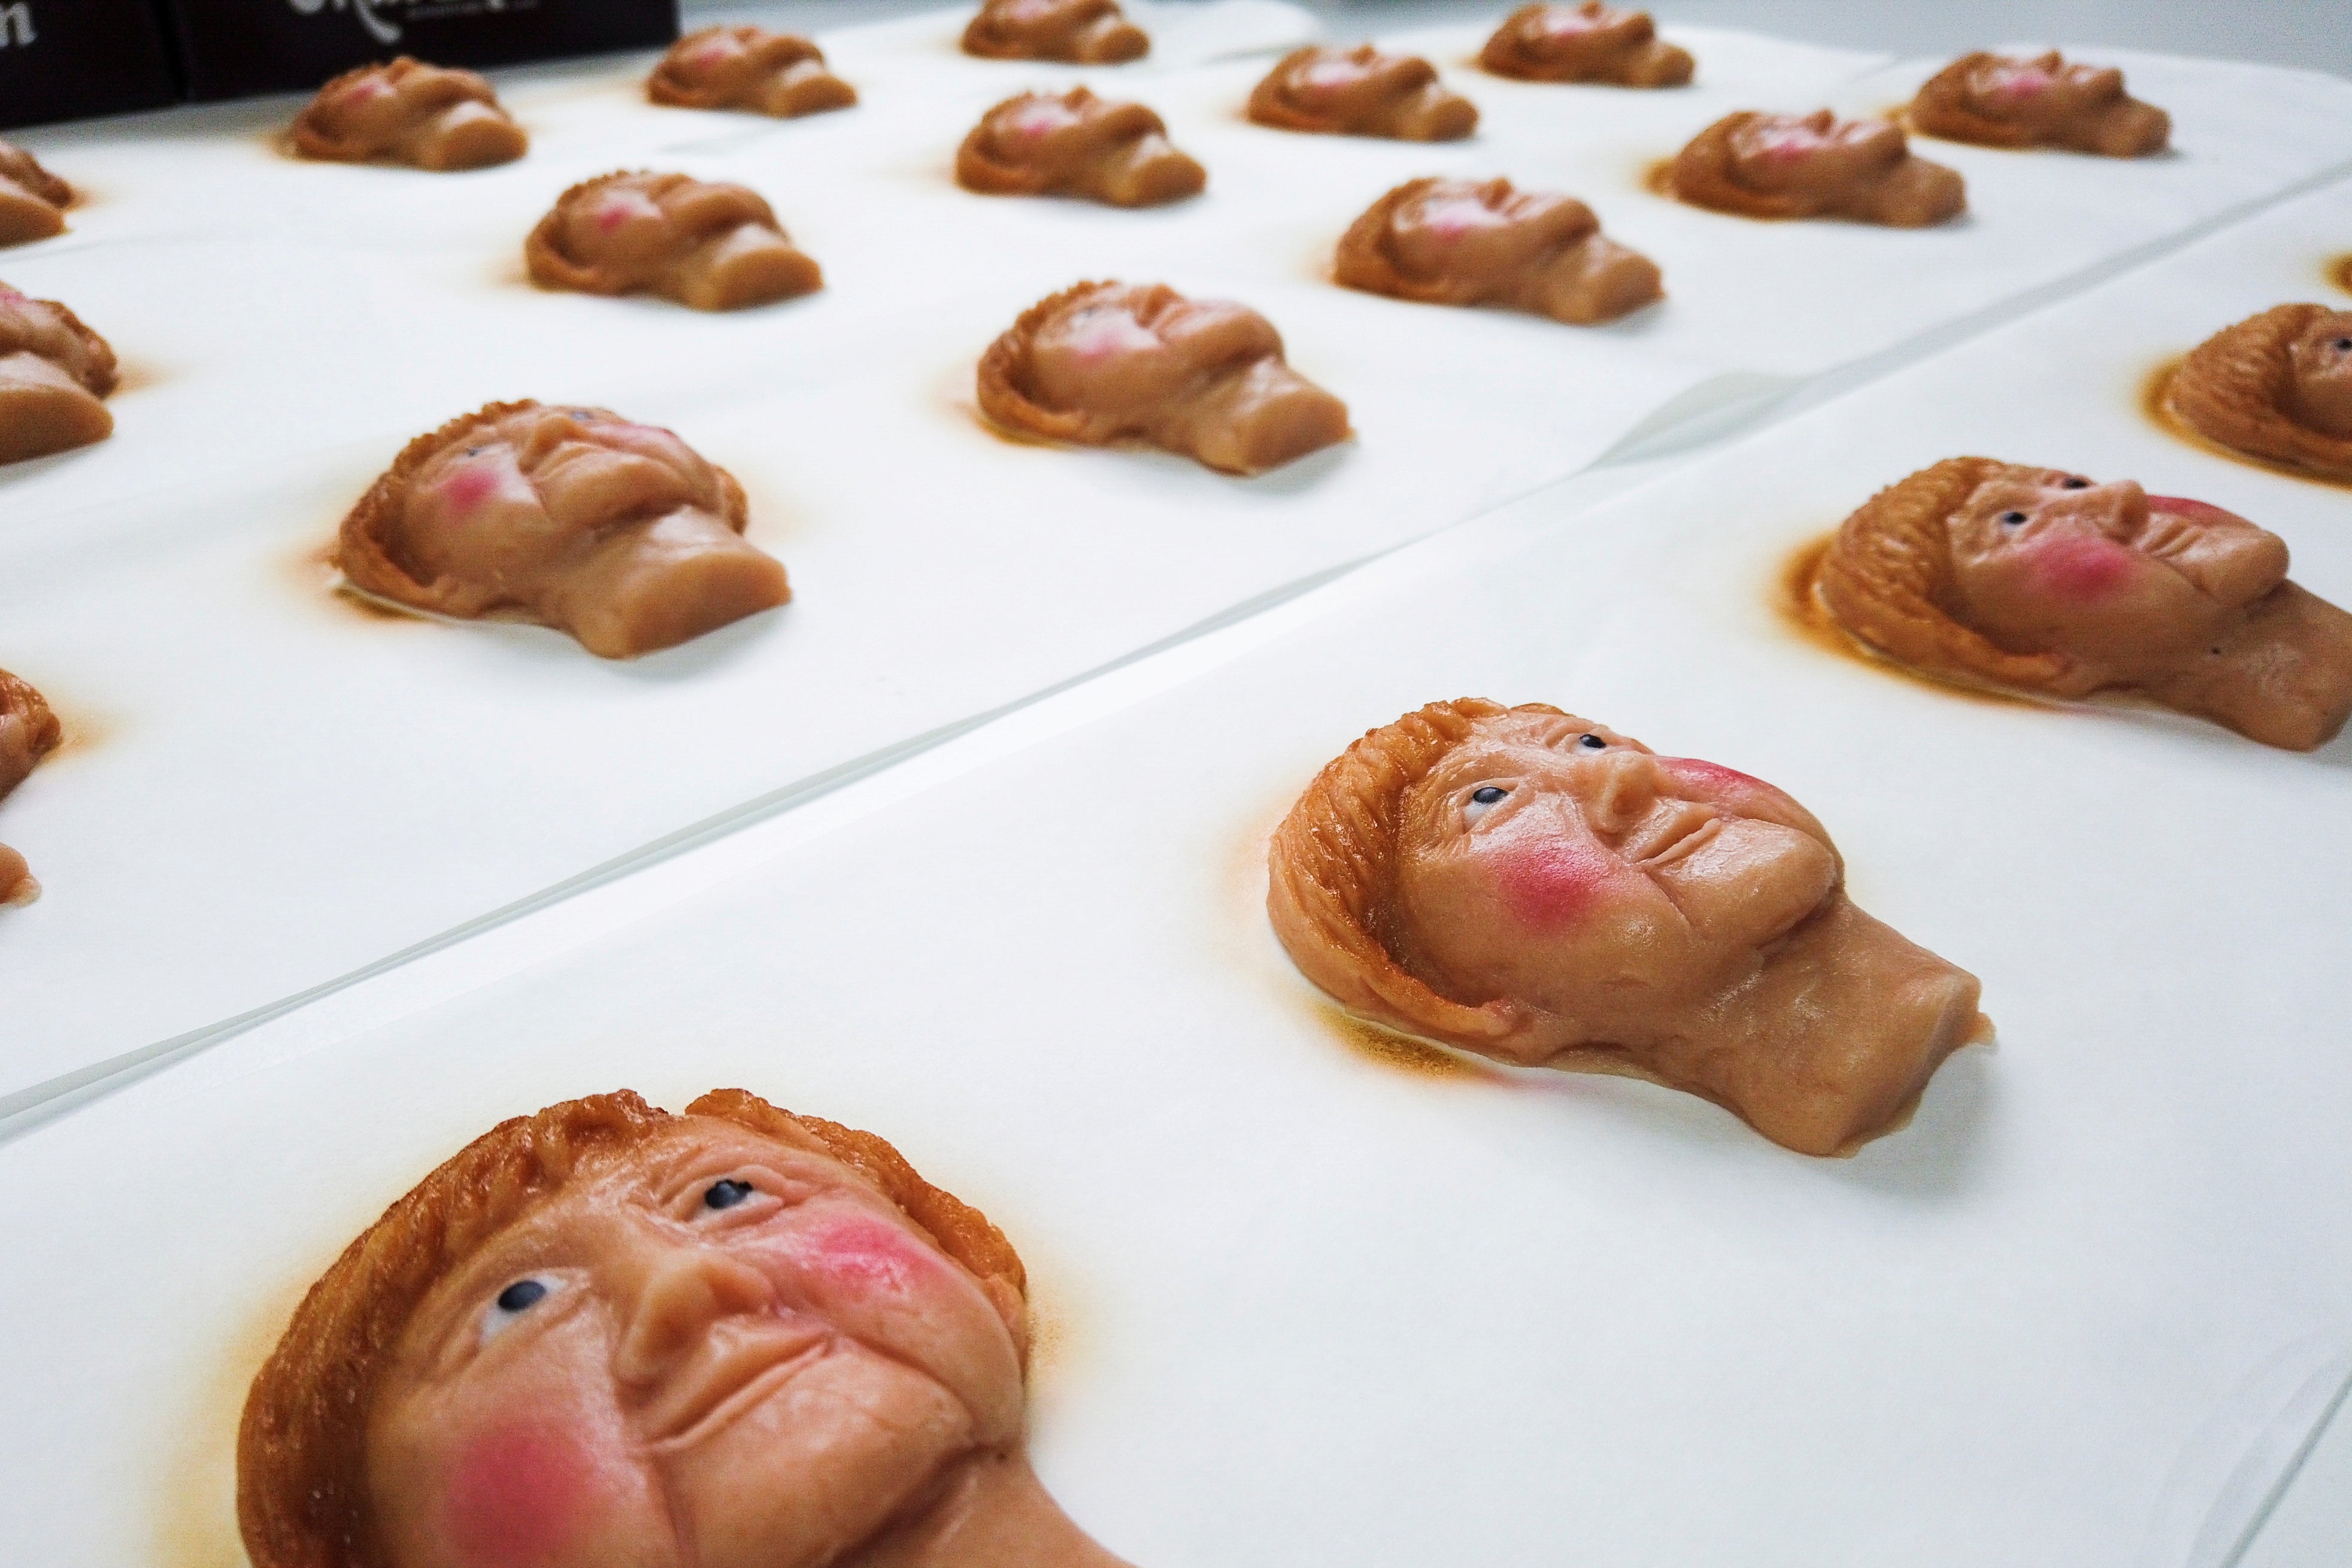 Cookies portraying Angela Merkel's face are seen on a sheet.